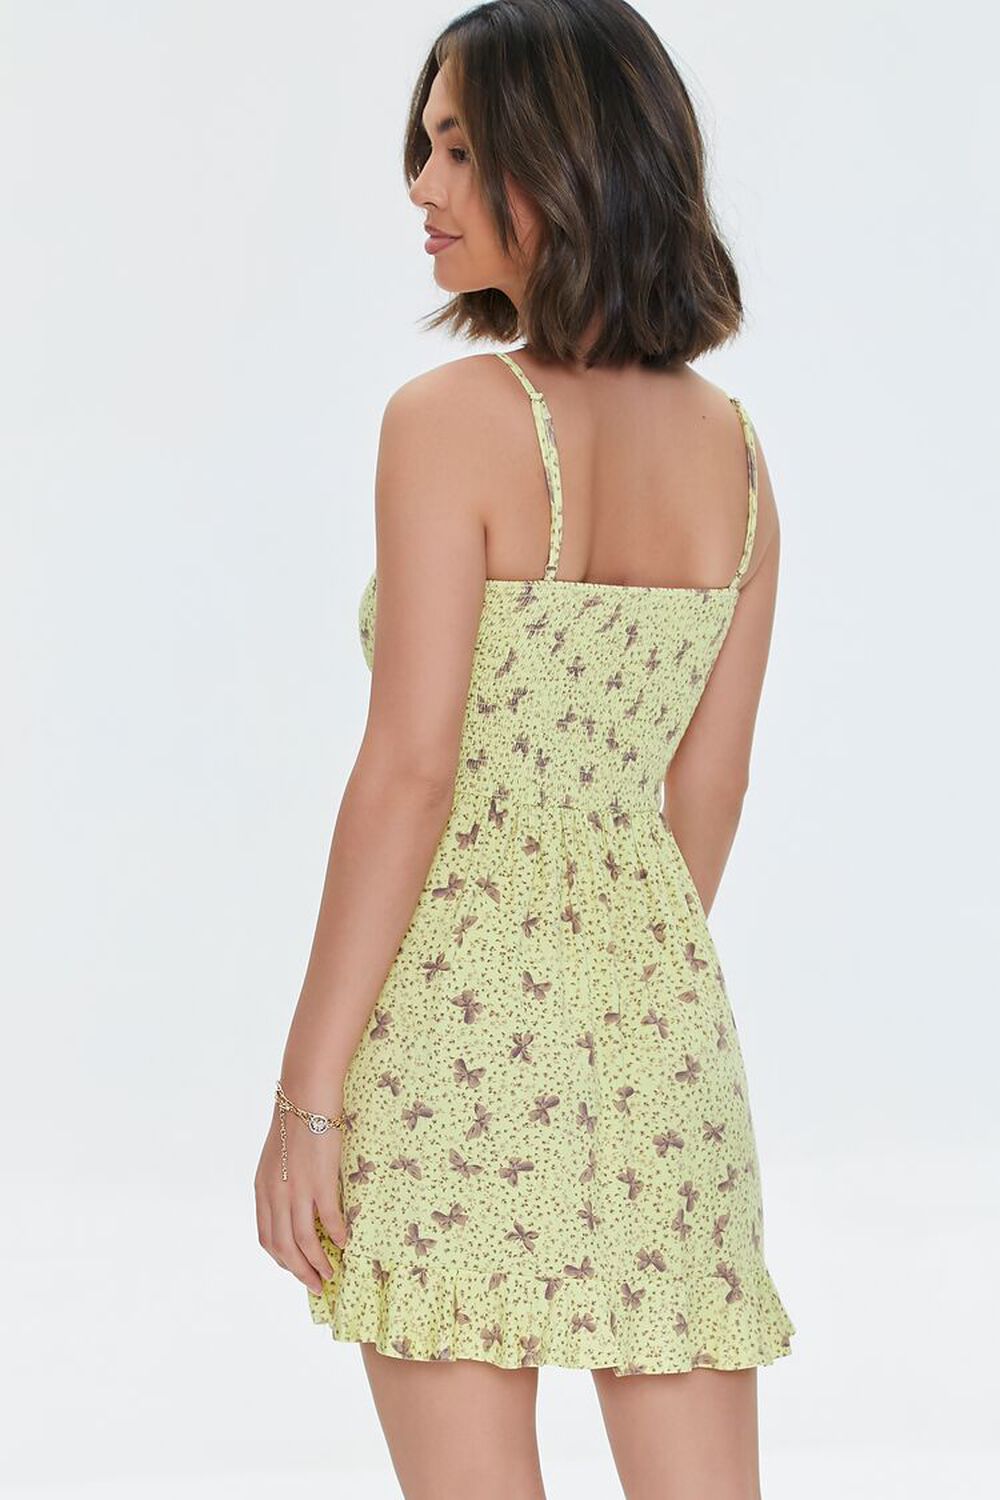 YELLOW/MULTI Butterfly Ditsy Floral Cami Dress, image 3